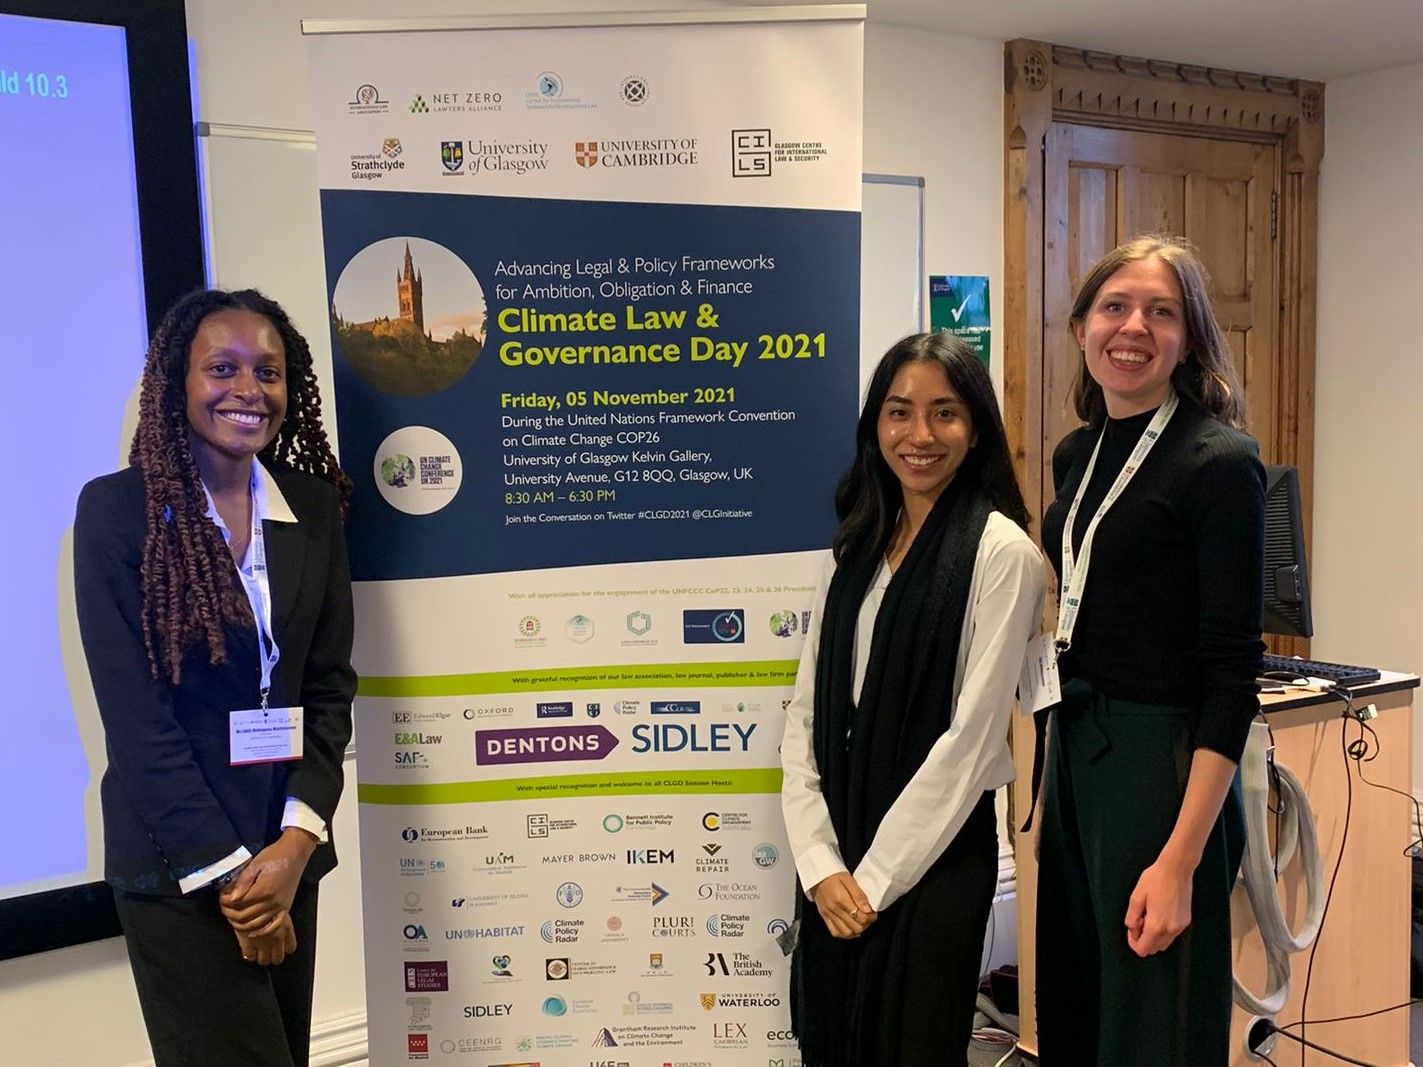 Chrislyn and two colleagues at the Climate Law & Governance Day 2021